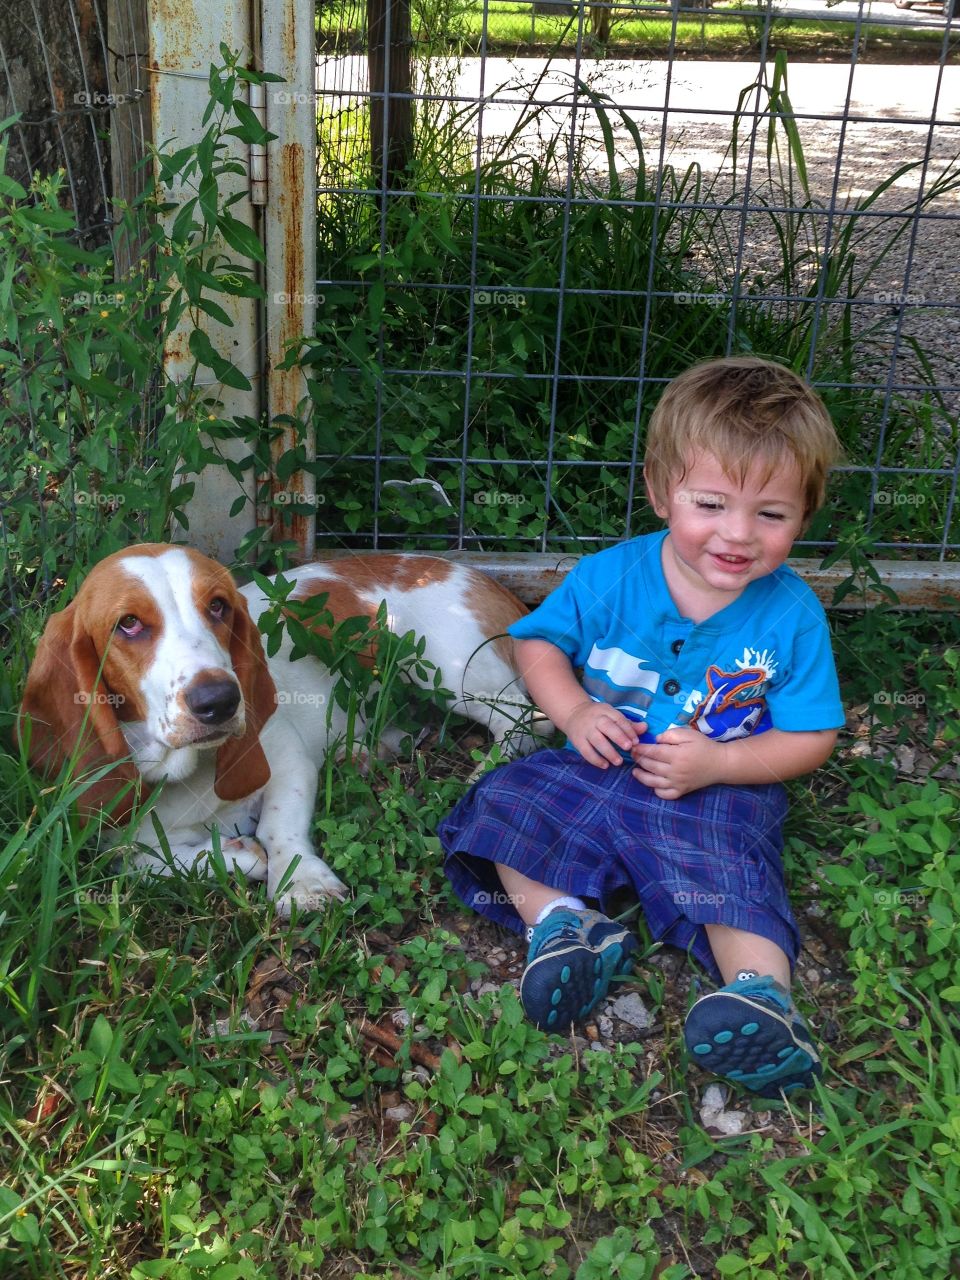 Our grandson and our dog Roxie setting in the corner of the yard. Like they waiting to get into something.